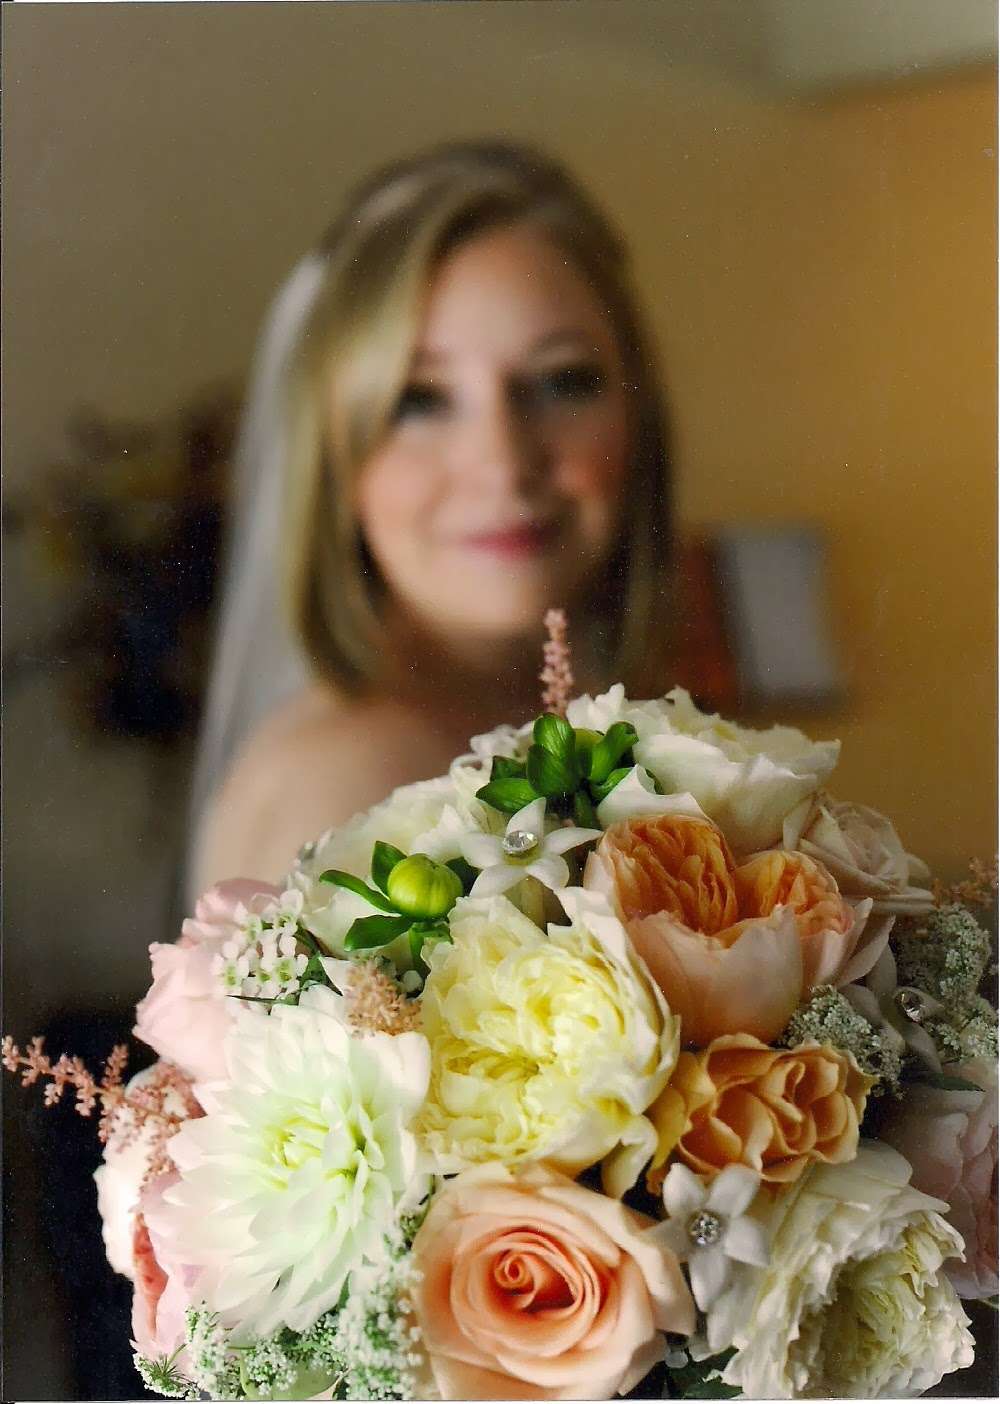 Carrs Floral Wedding Designs | 10948 W 167th St, Orland Park, IL 60467 | Phone: (708) 403-8933